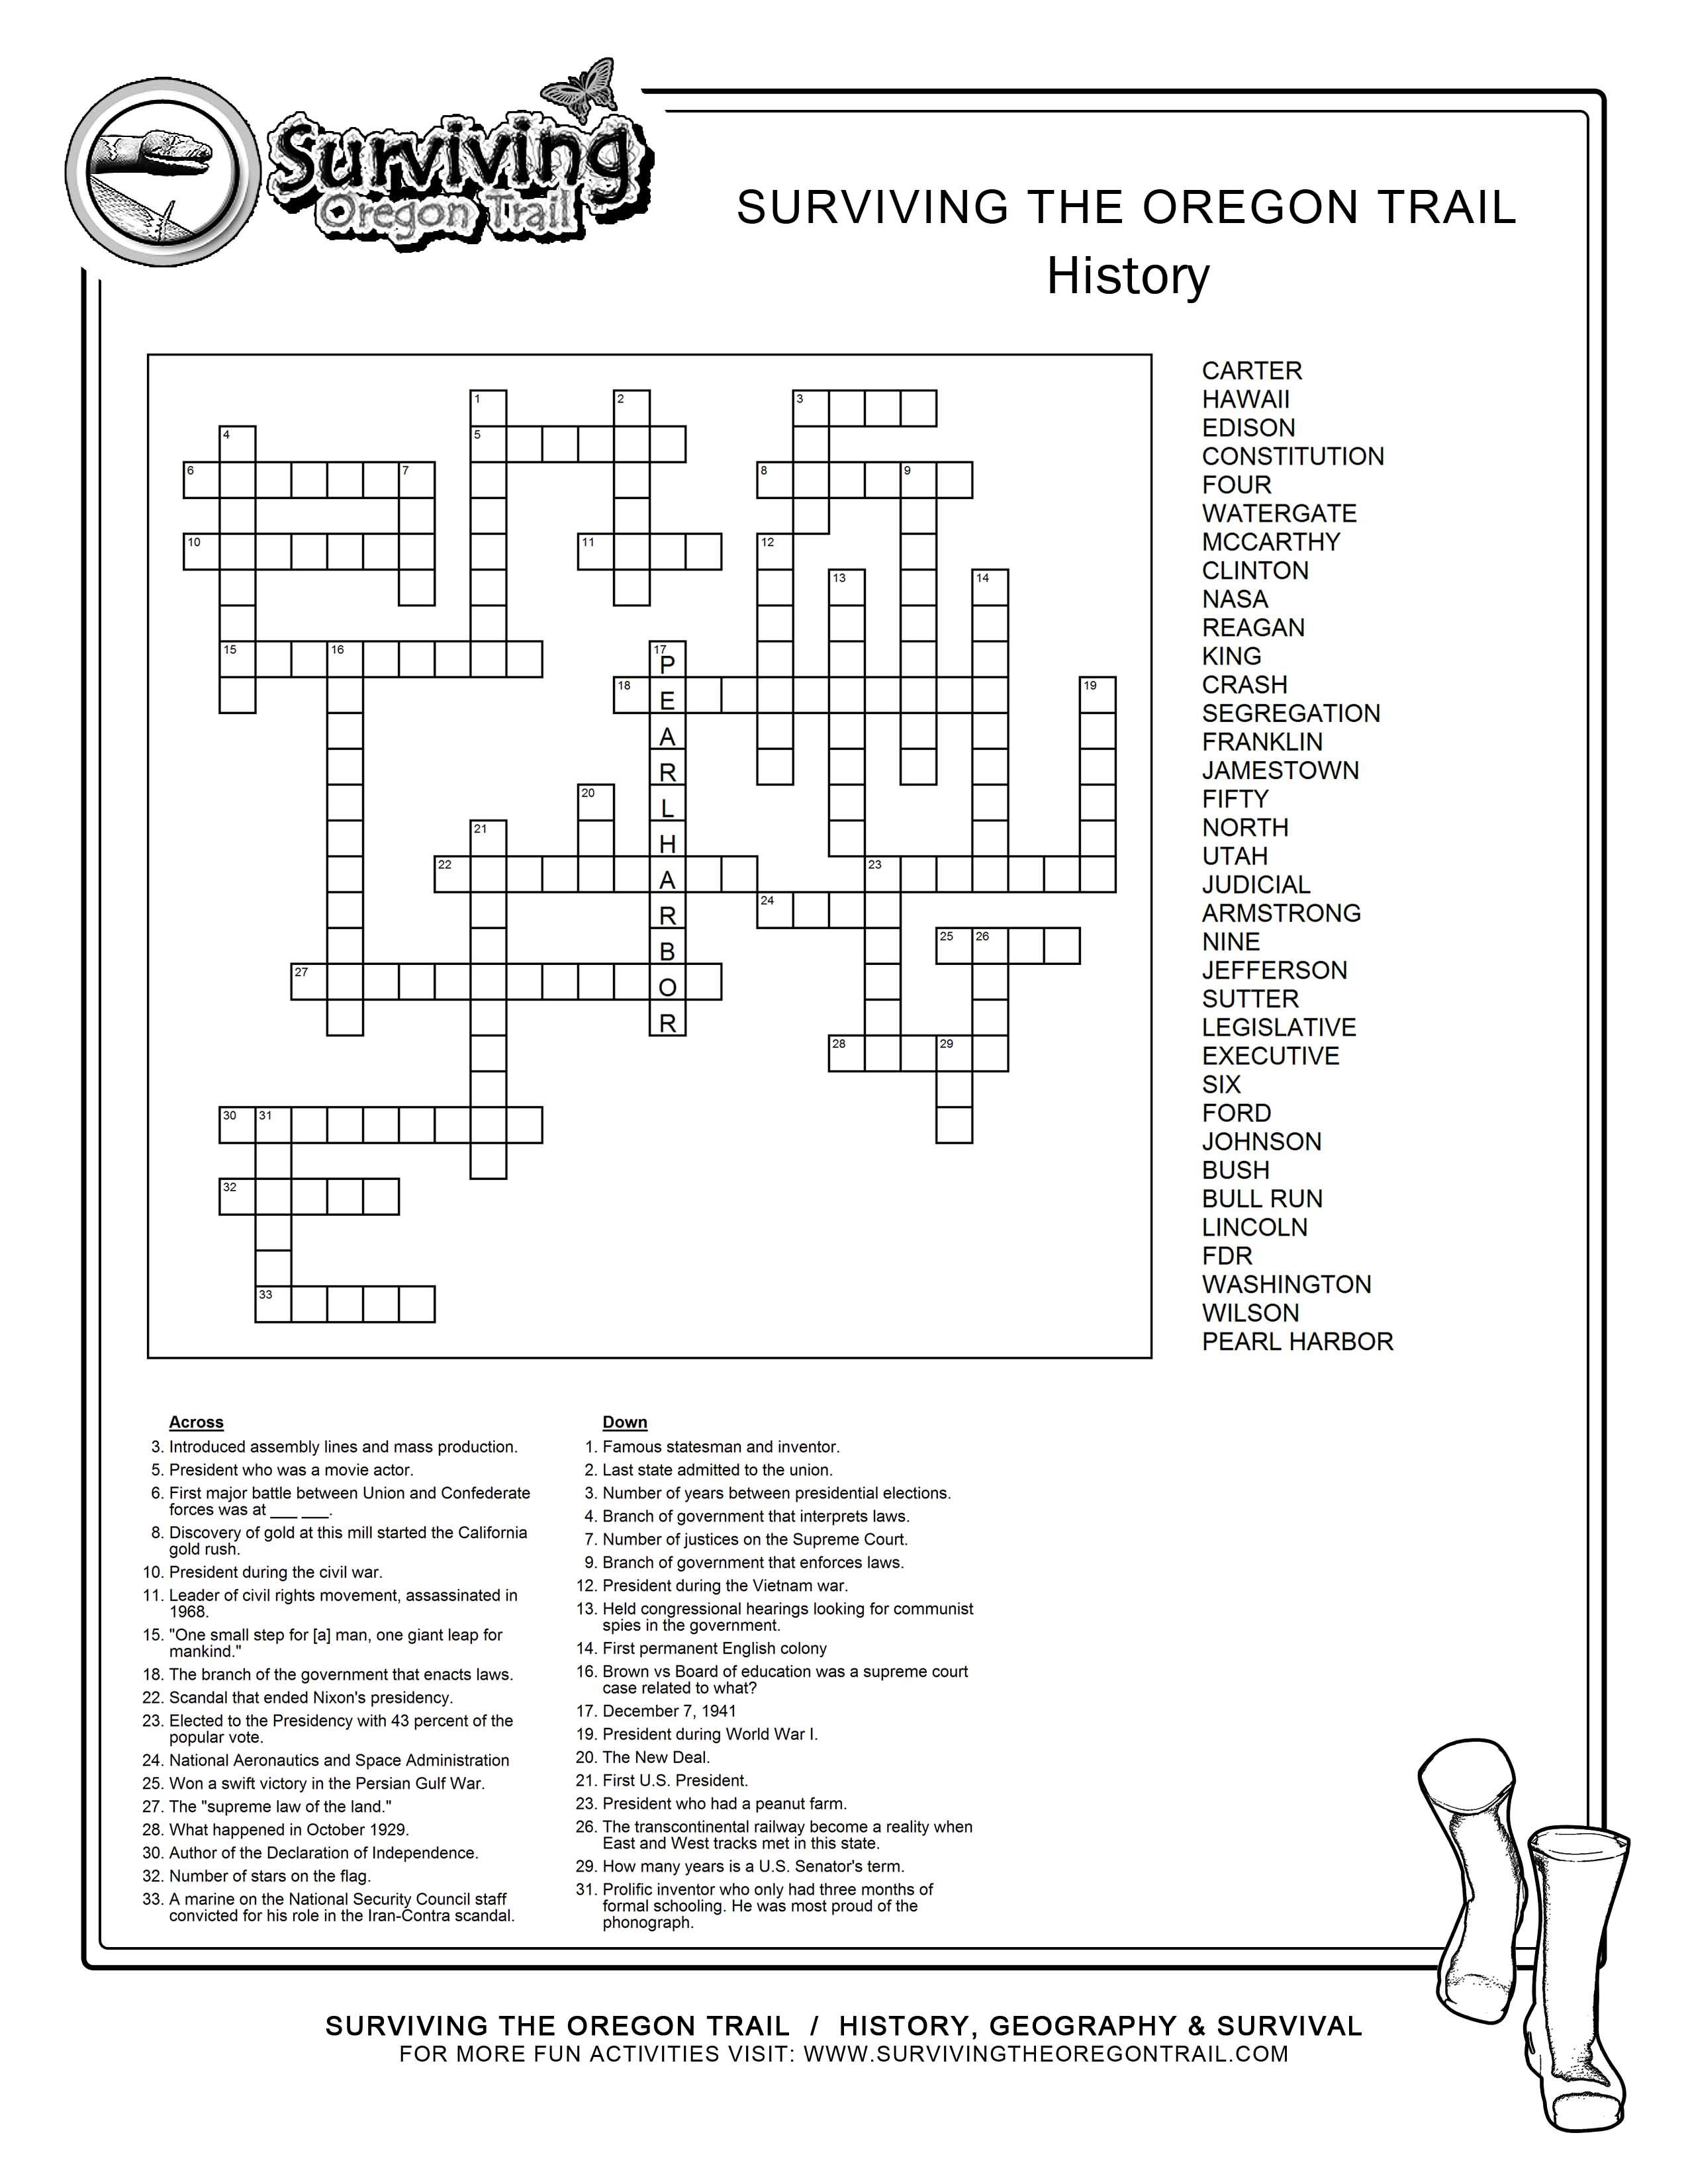 Fill Free To Save This Historical Crossword Puzzle To Your Computer - Printable Nba Crossword Puzzles